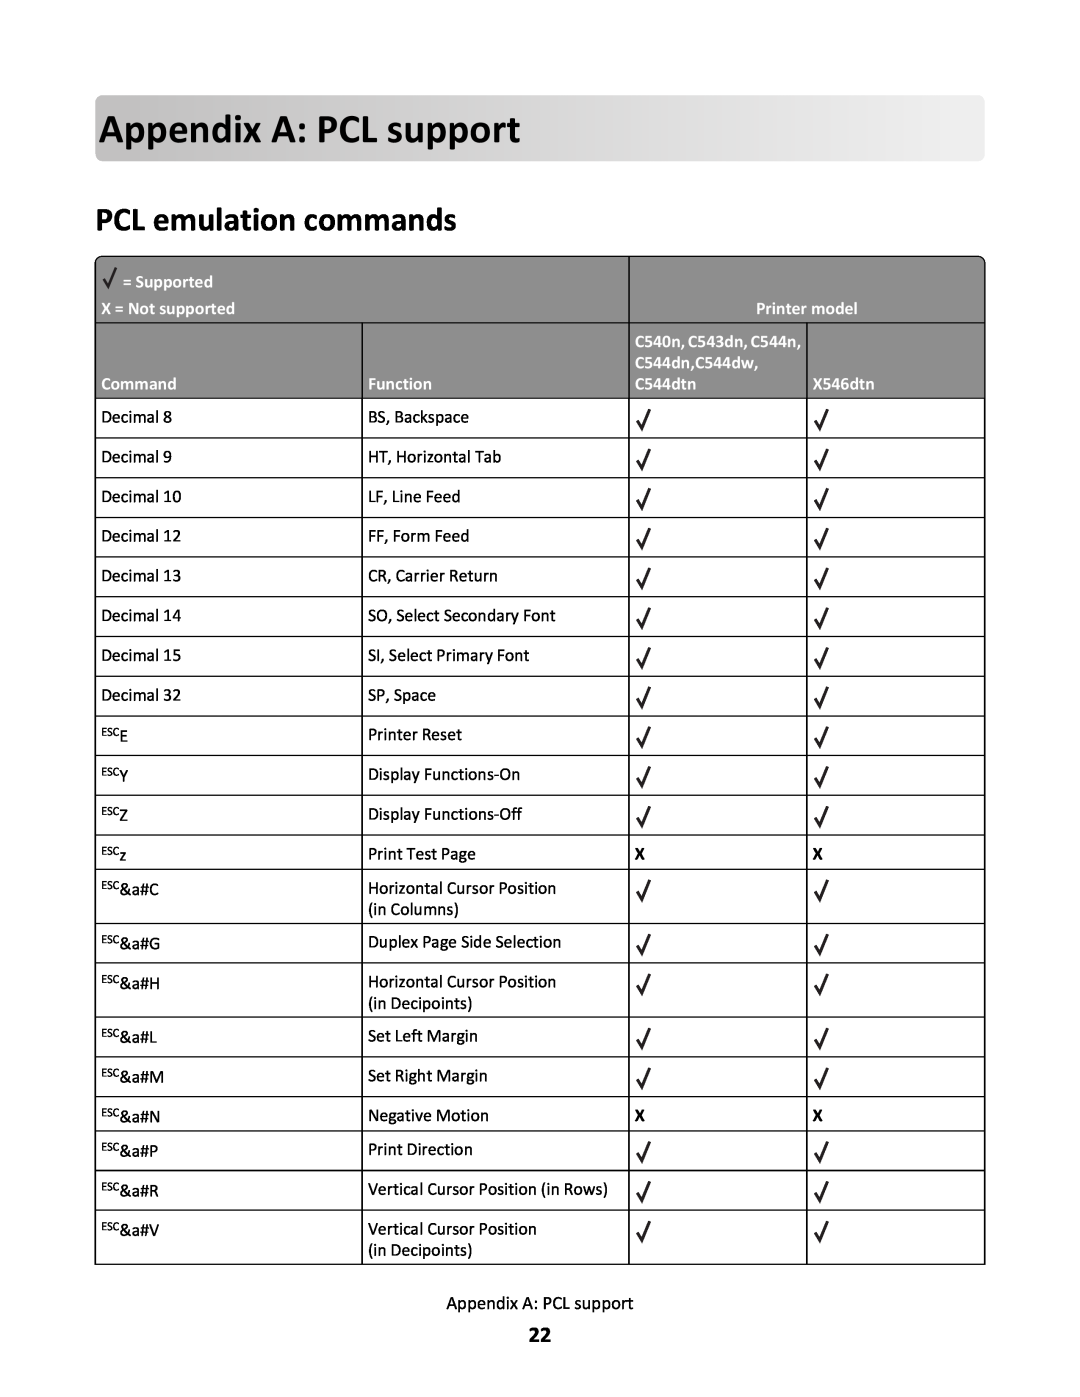 Lexmark C544N/DN/DW/DTN manual Appendix APCL support, PCL emulation commands, = Supported, X = Not supported, Printer model 